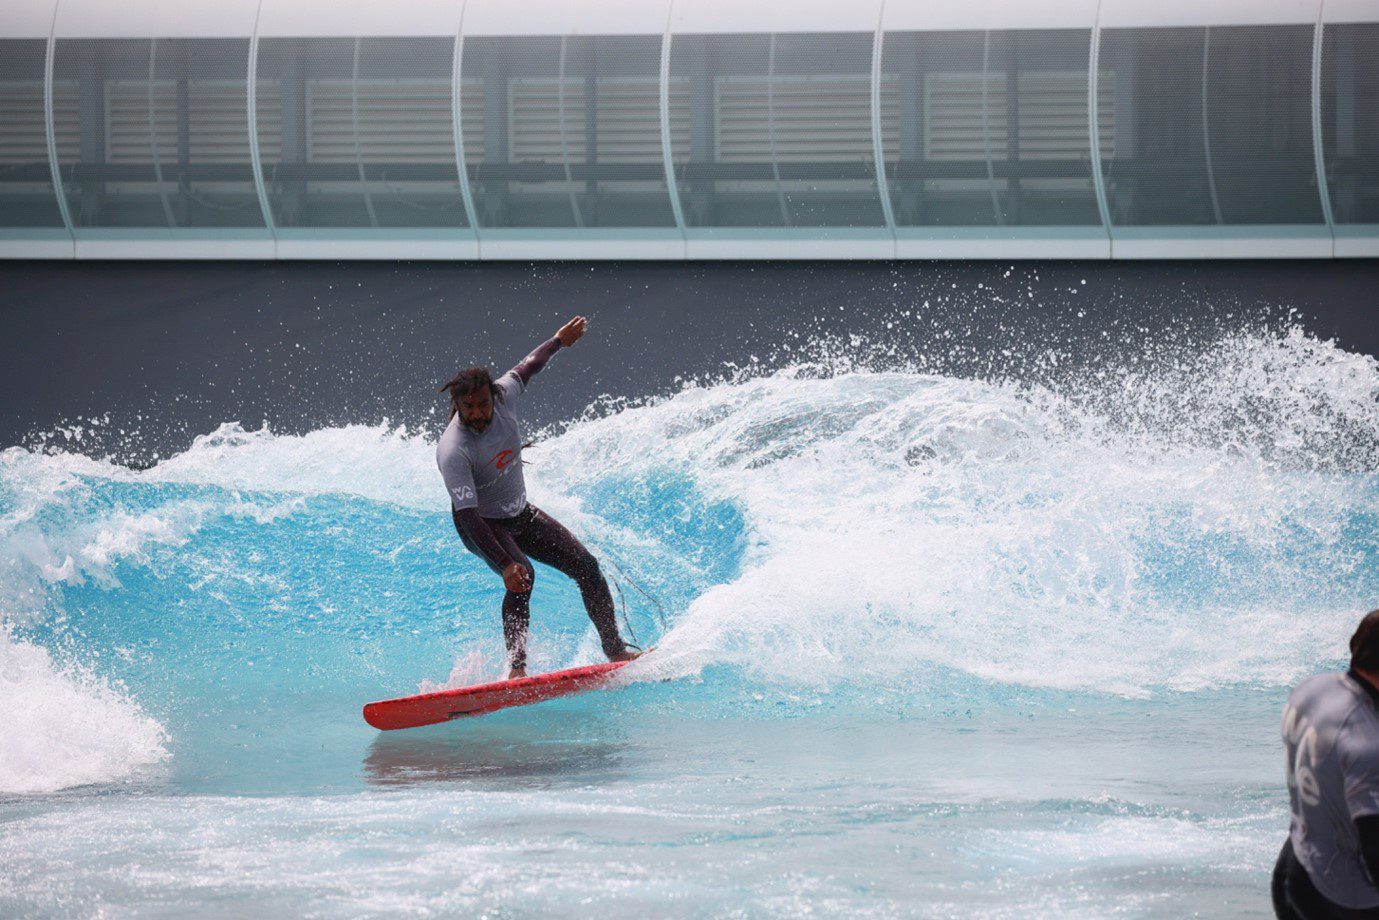 Nick Donawa surfing at The Wave in Bristol